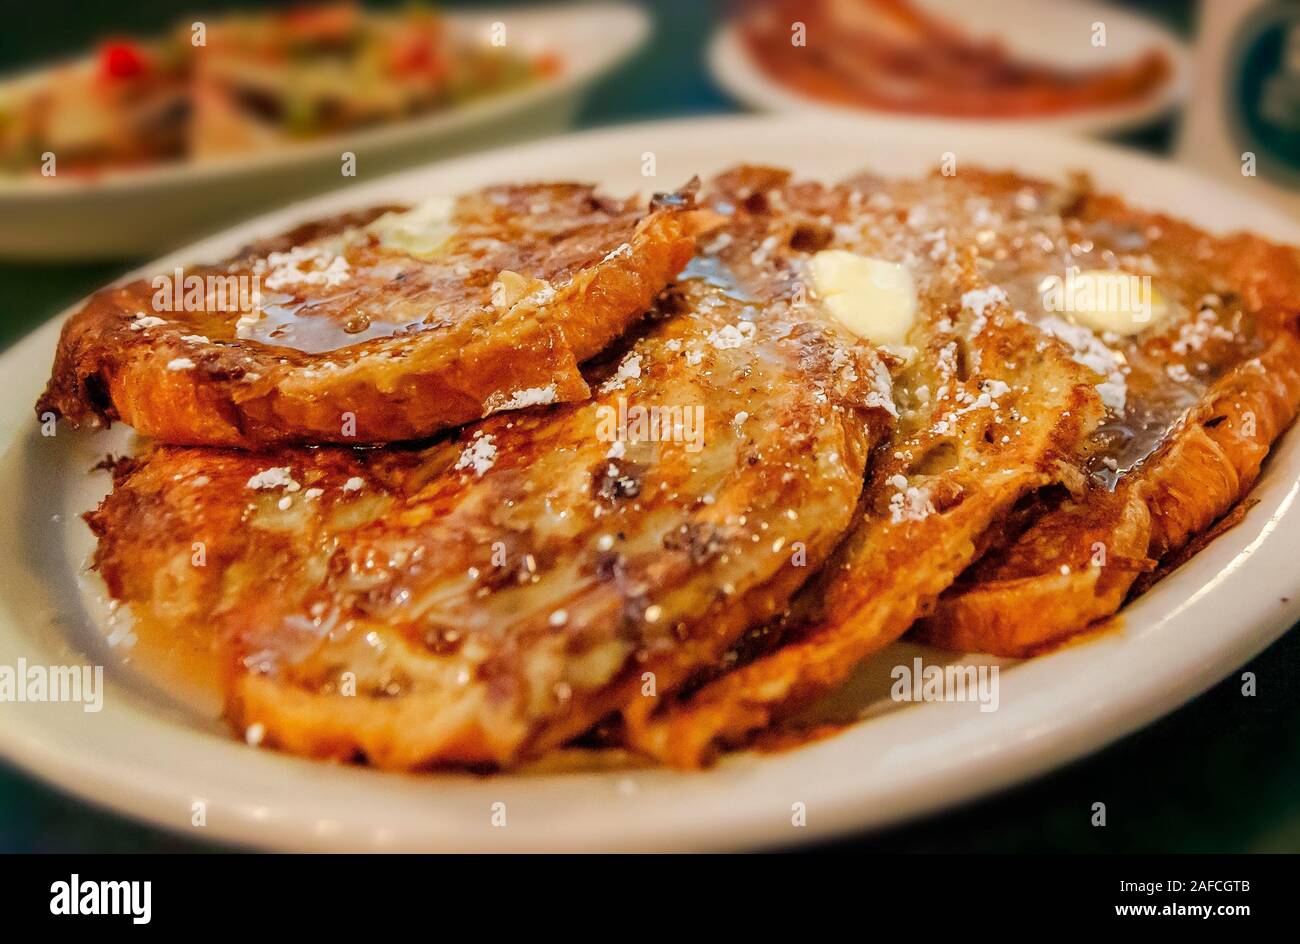 Croissant French Toast is paired with bacon and hashbrowns for breakfast at Metro Diner, July 29, 2018, in Huntsville, Alabama. Stock Photo